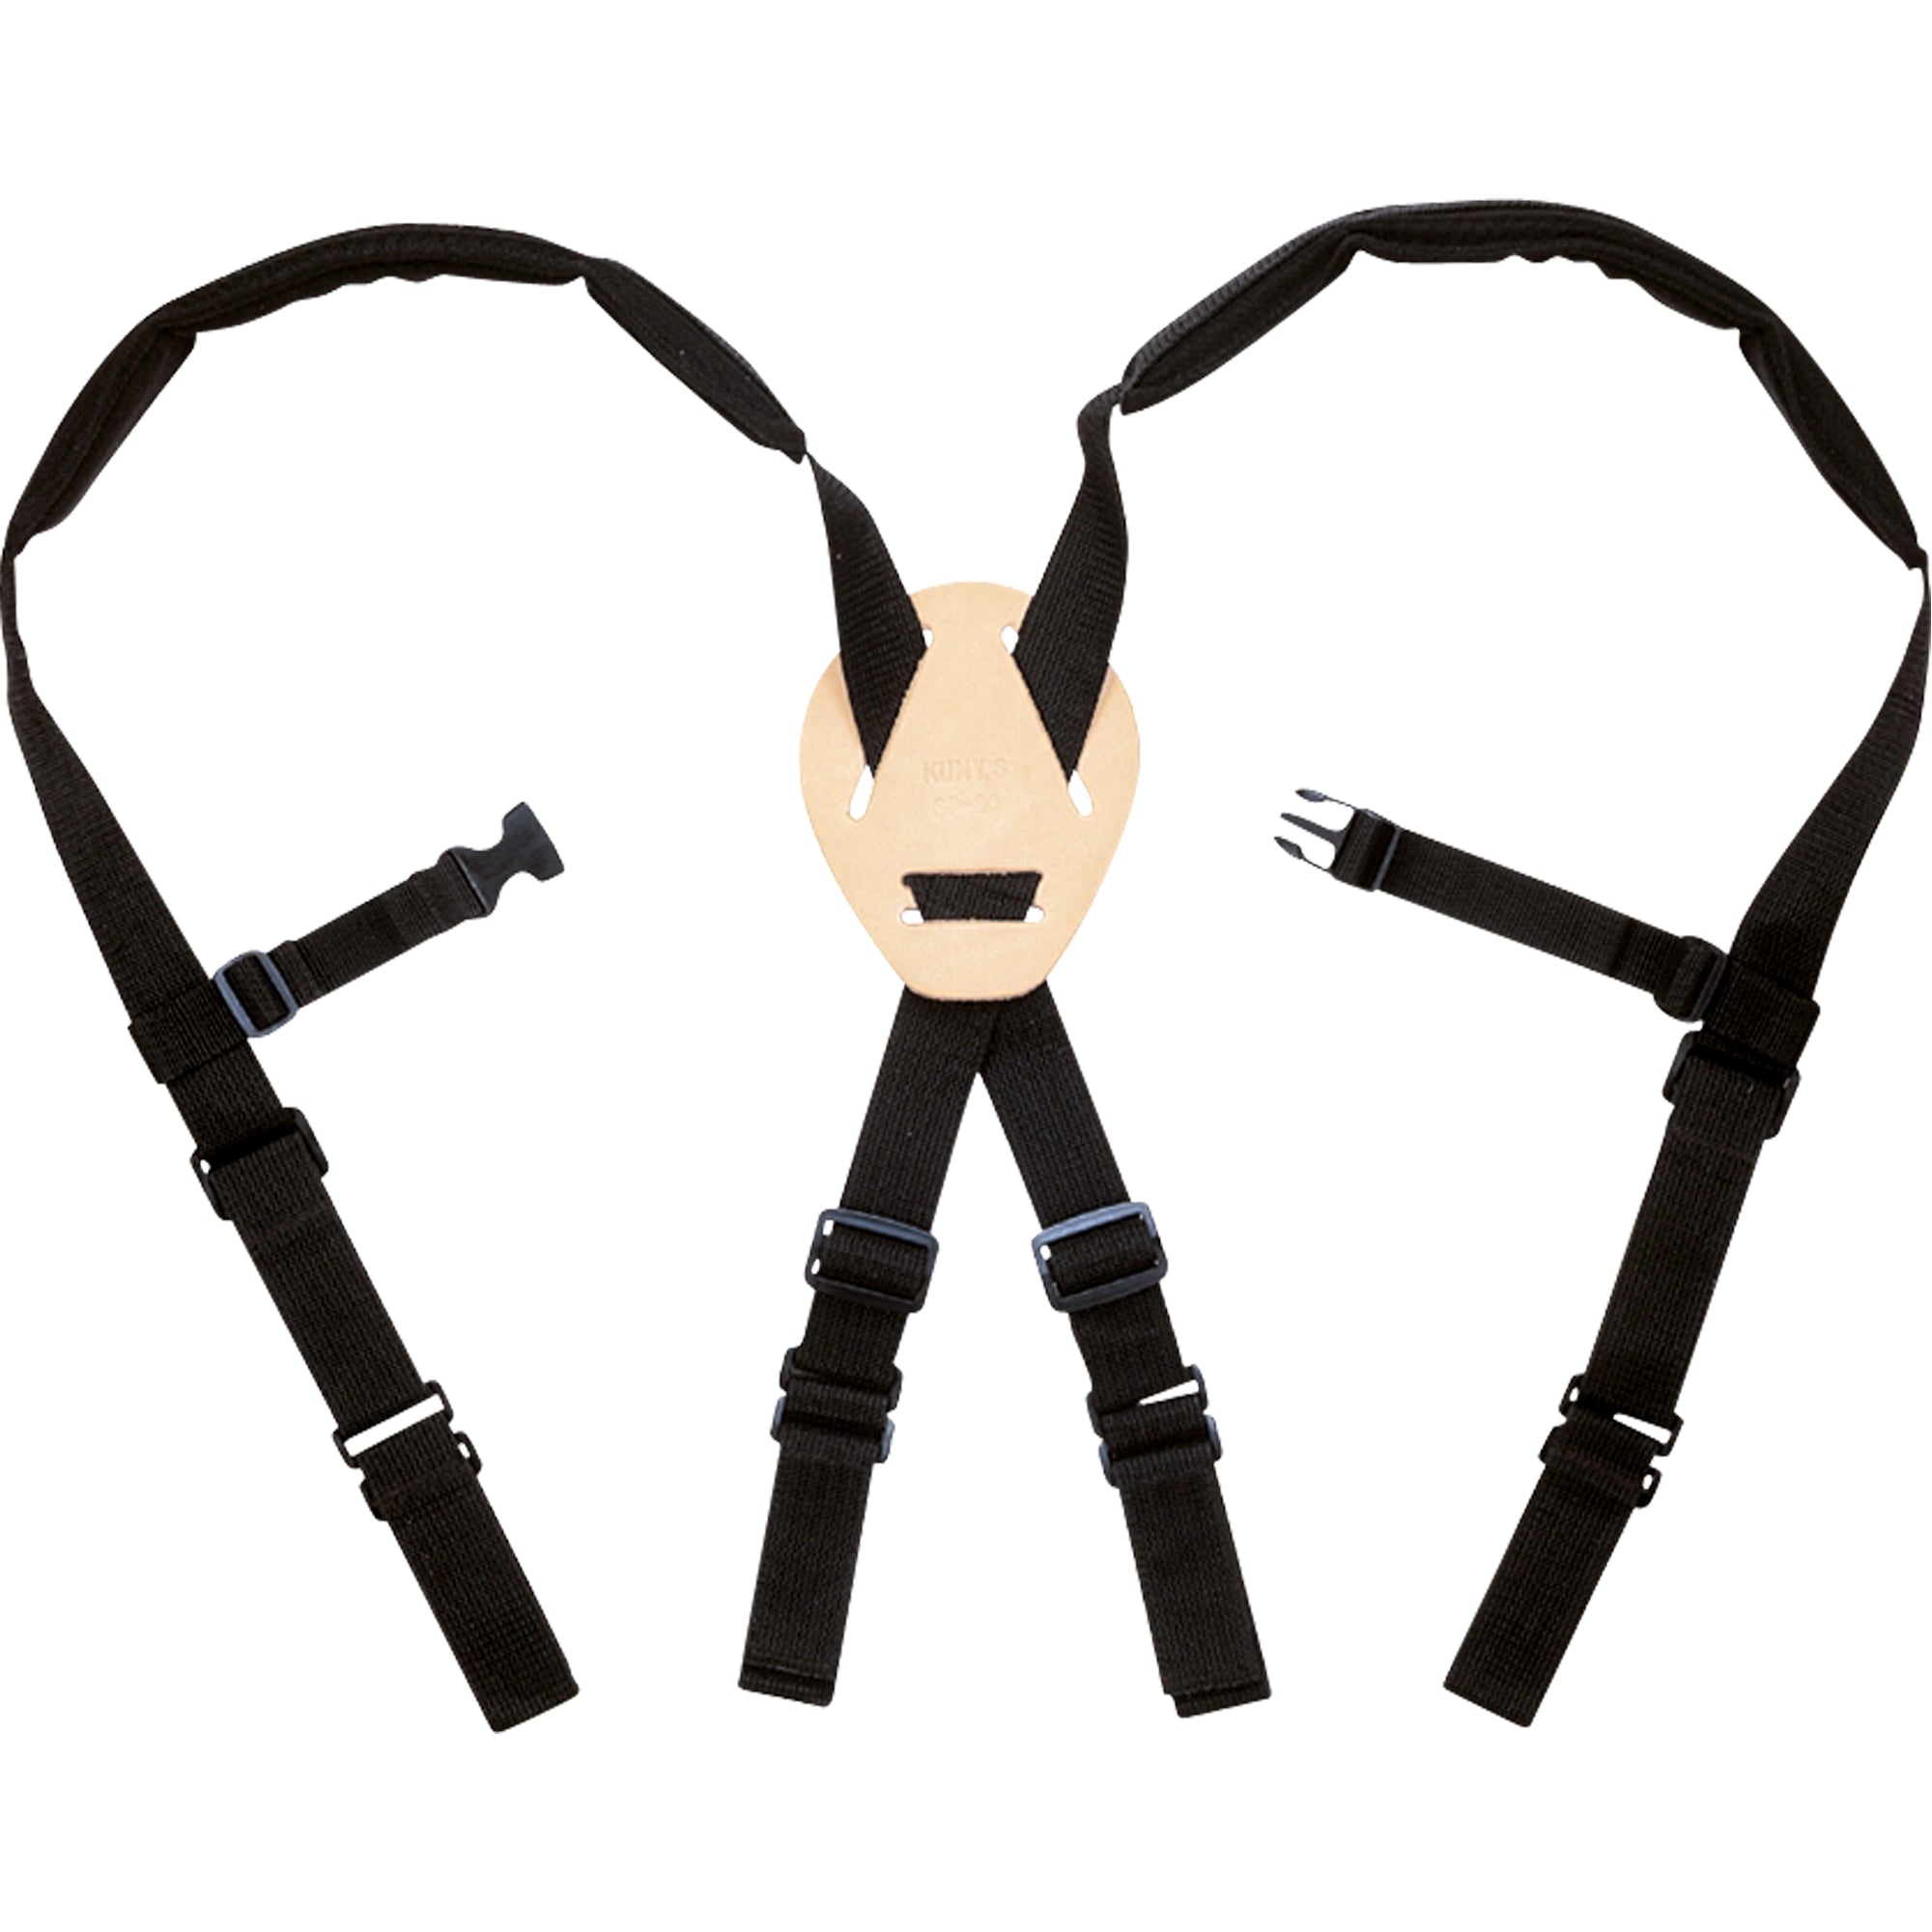 Kuny’s Padded Construction Suspenders - wise-line-tools